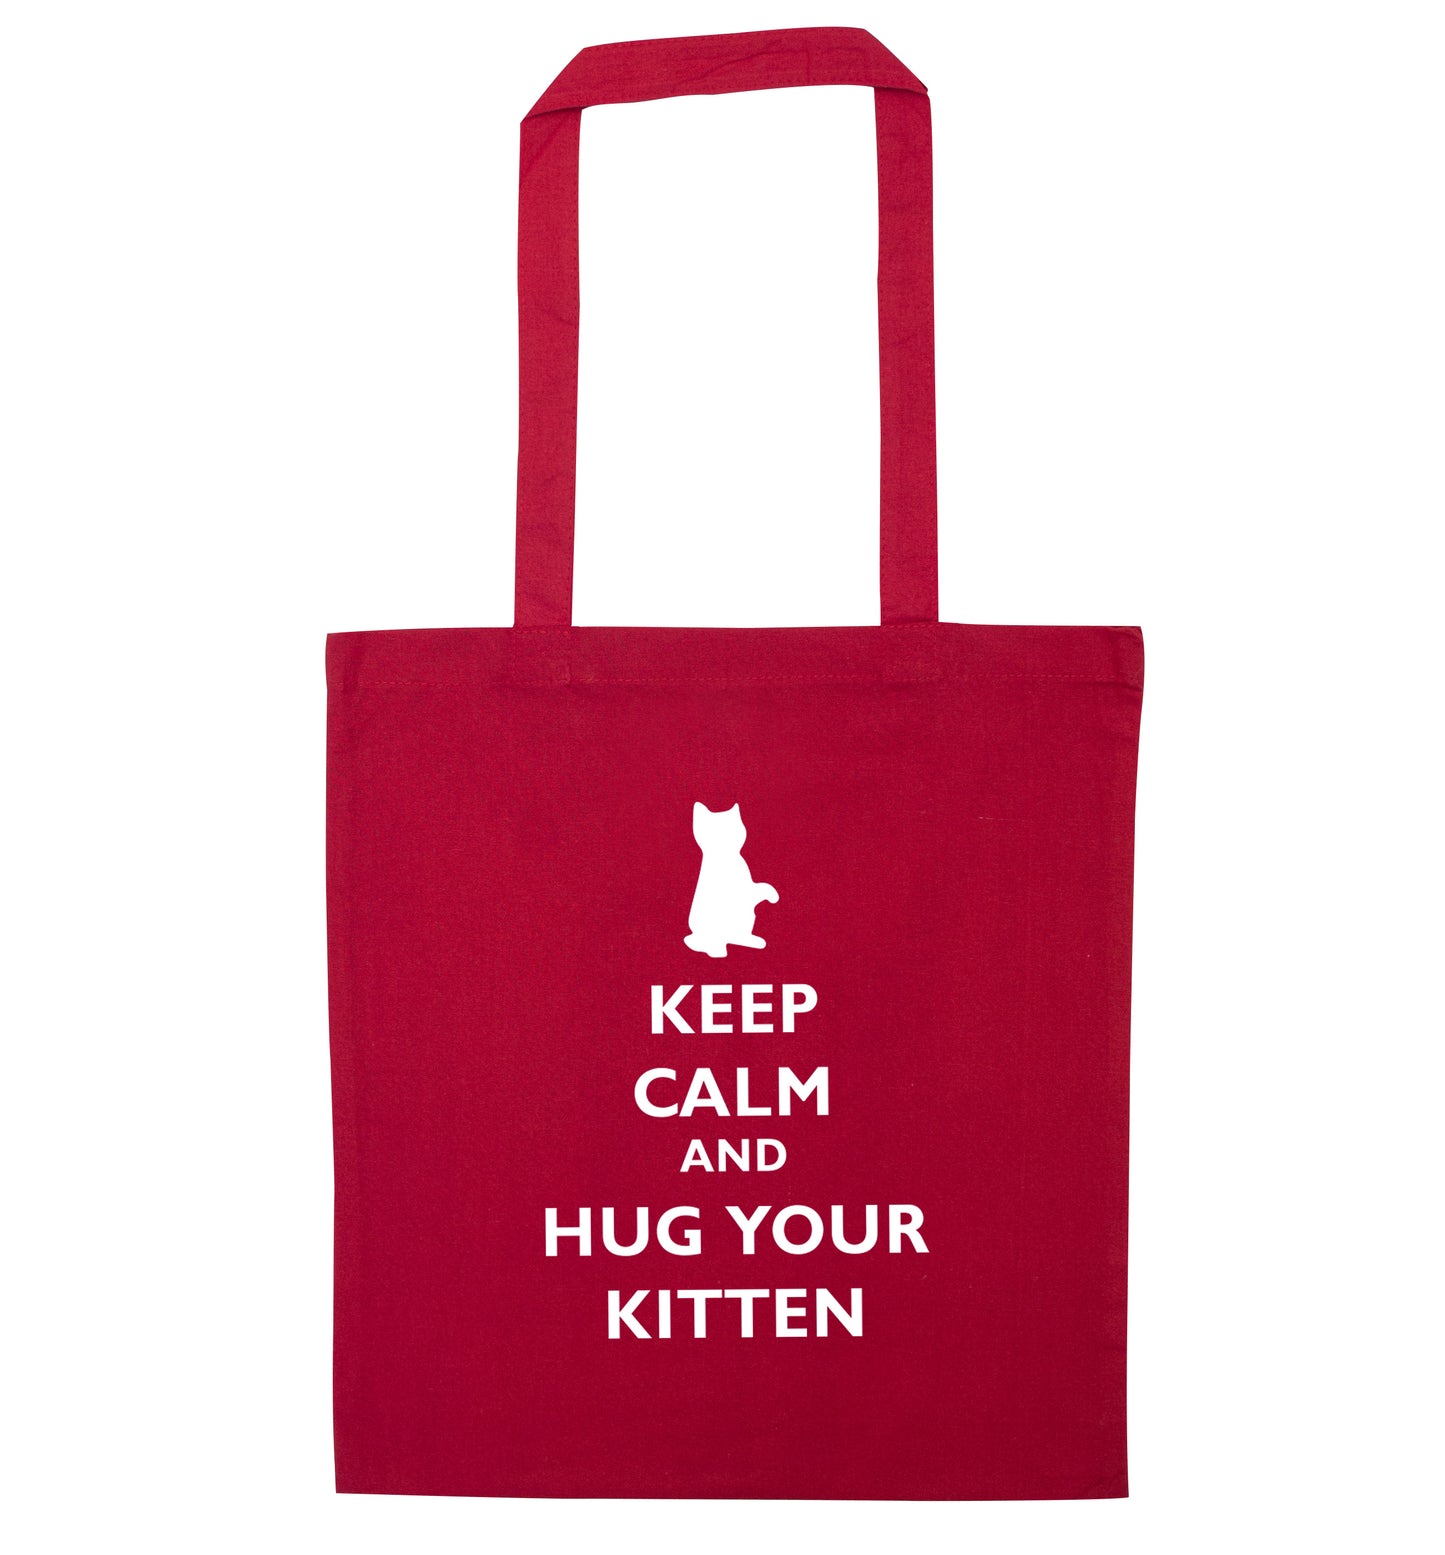 Keep calm and hug your kitten red tote bag